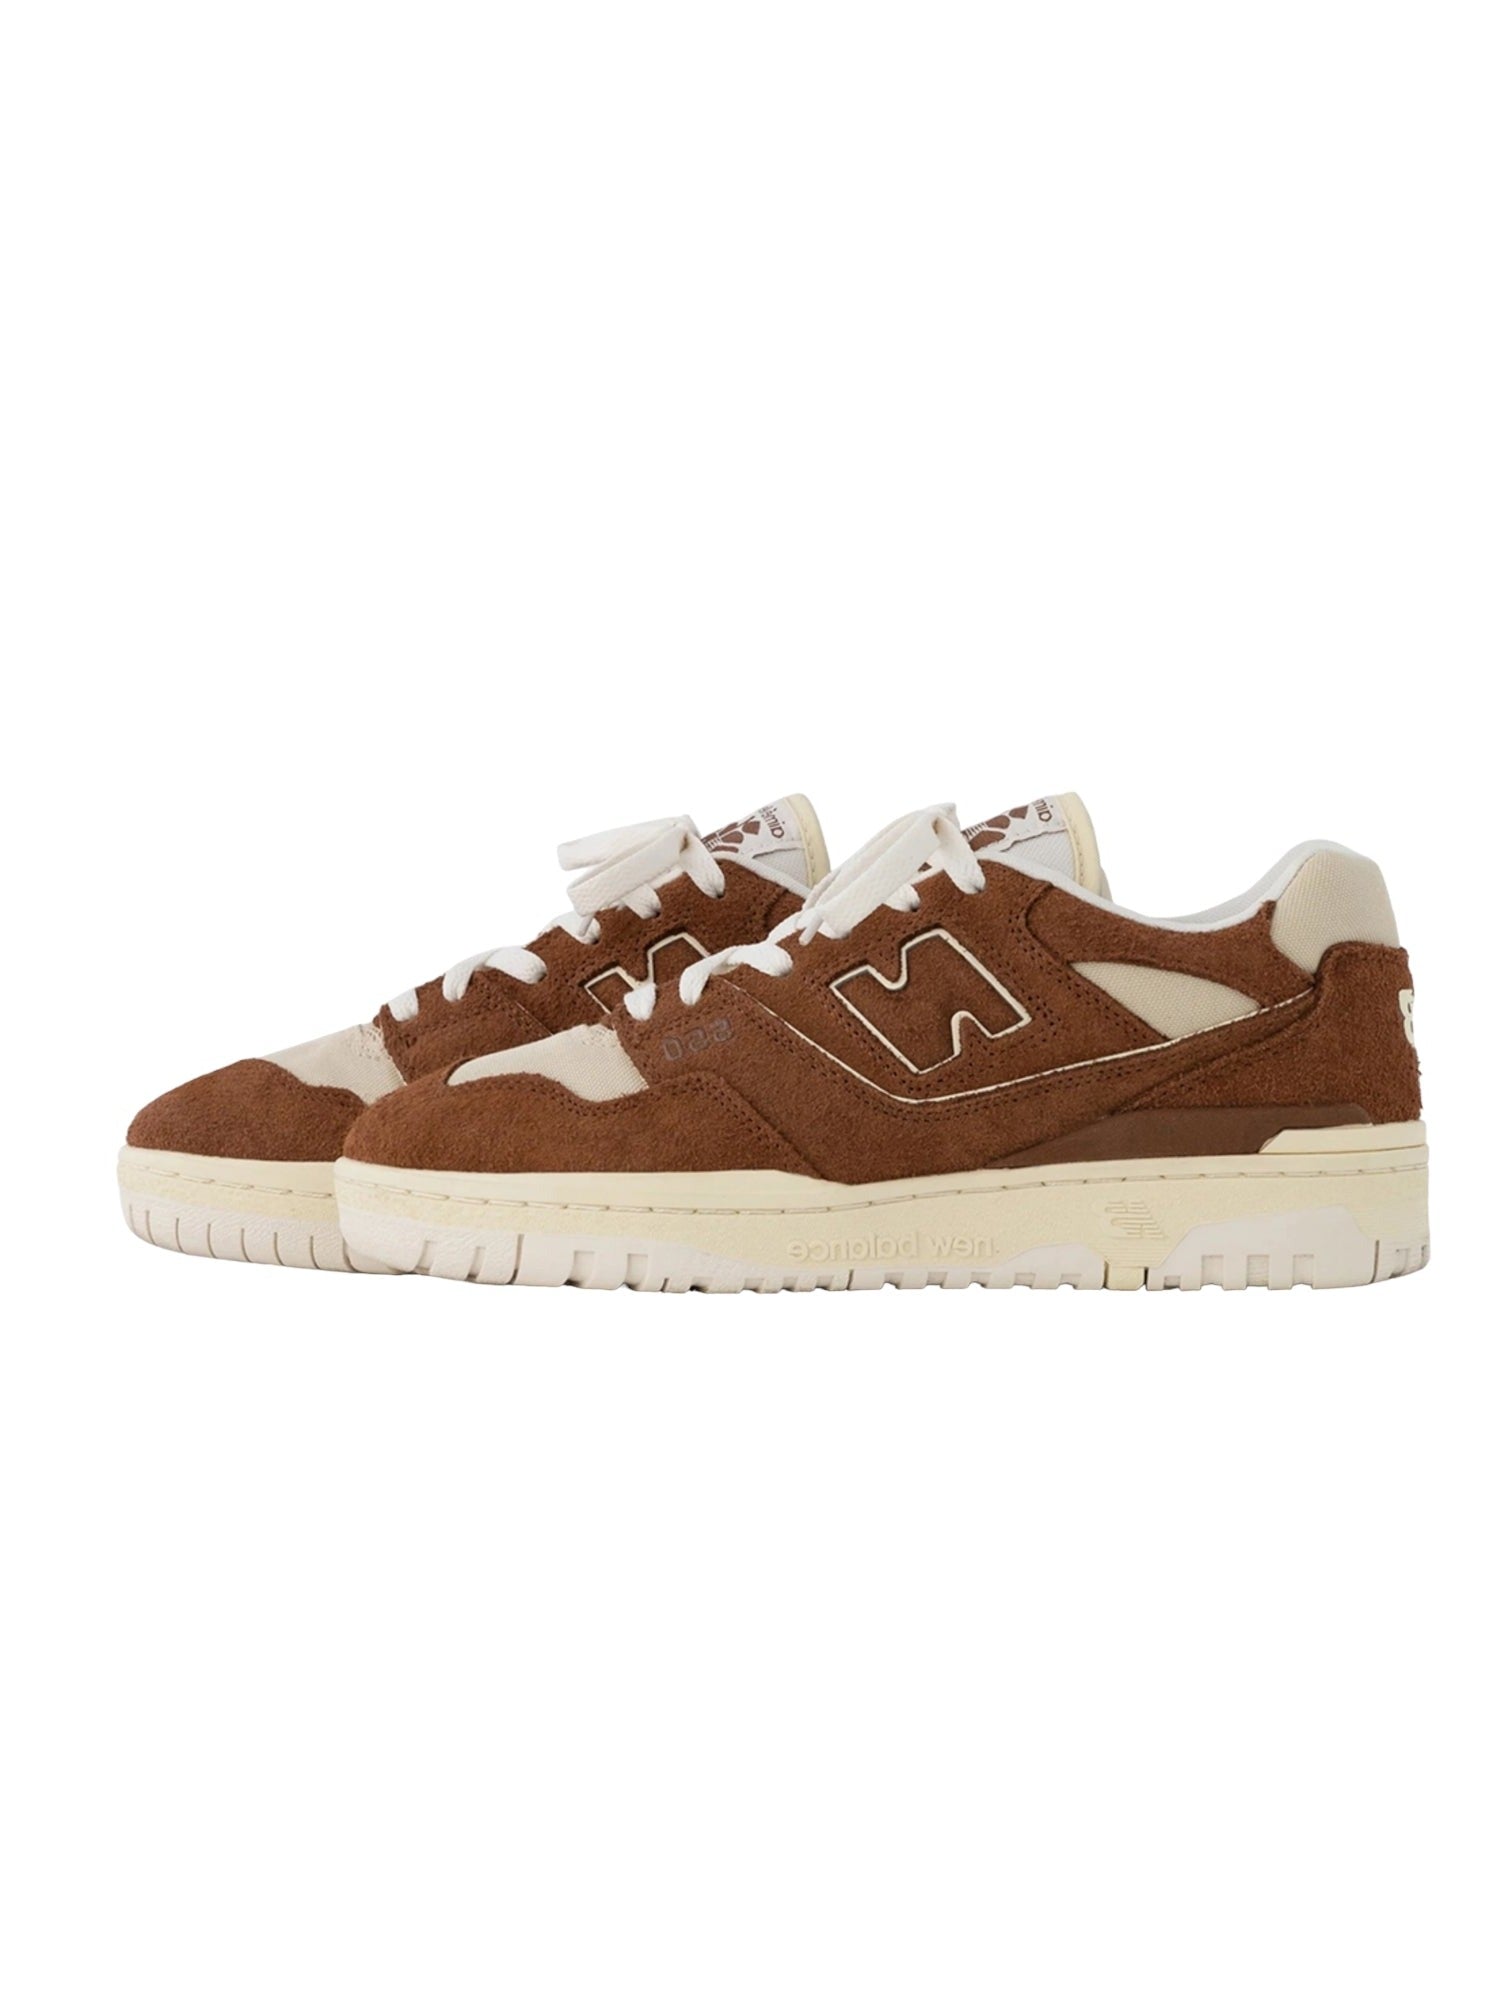 New Balance 550 Aime Leon Dore Brown Sneakers - Genuine Design Luxury Consignment for Men. New & Pre-Owned Clothing, Shoes, & Accessories. Calgary, Canada